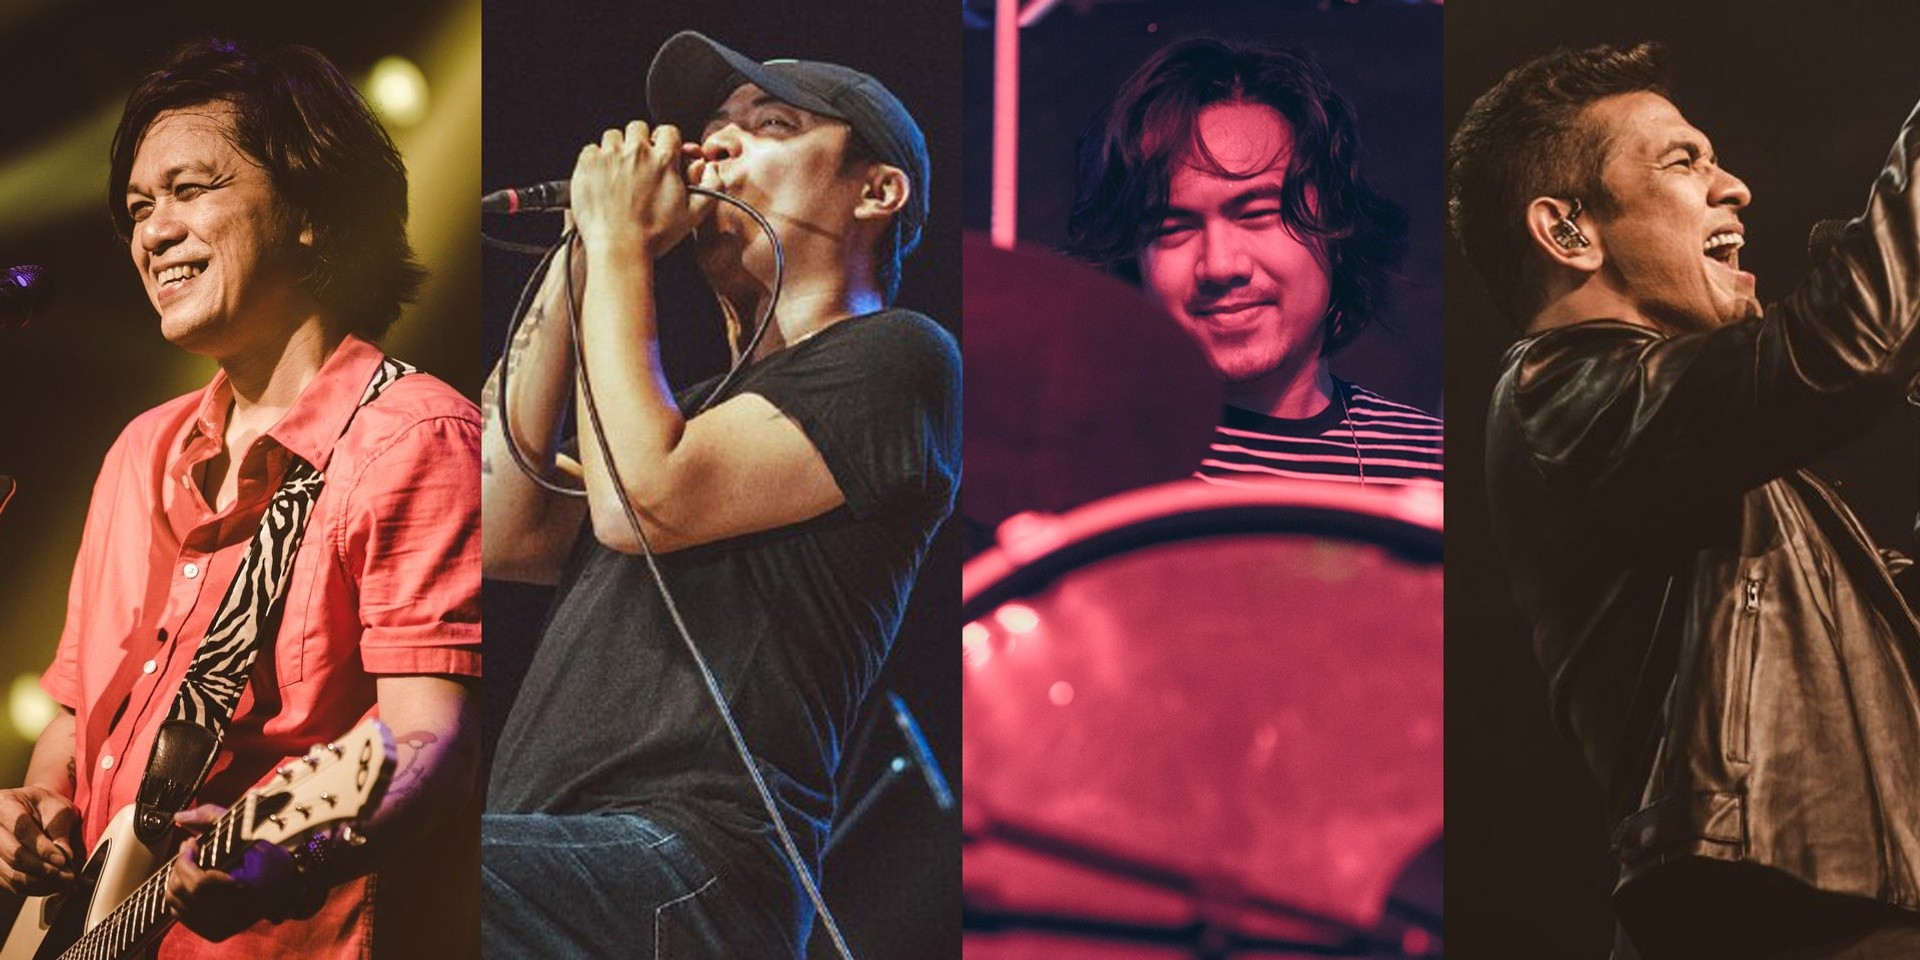 Filipino musicians share stories and lessons from their dads